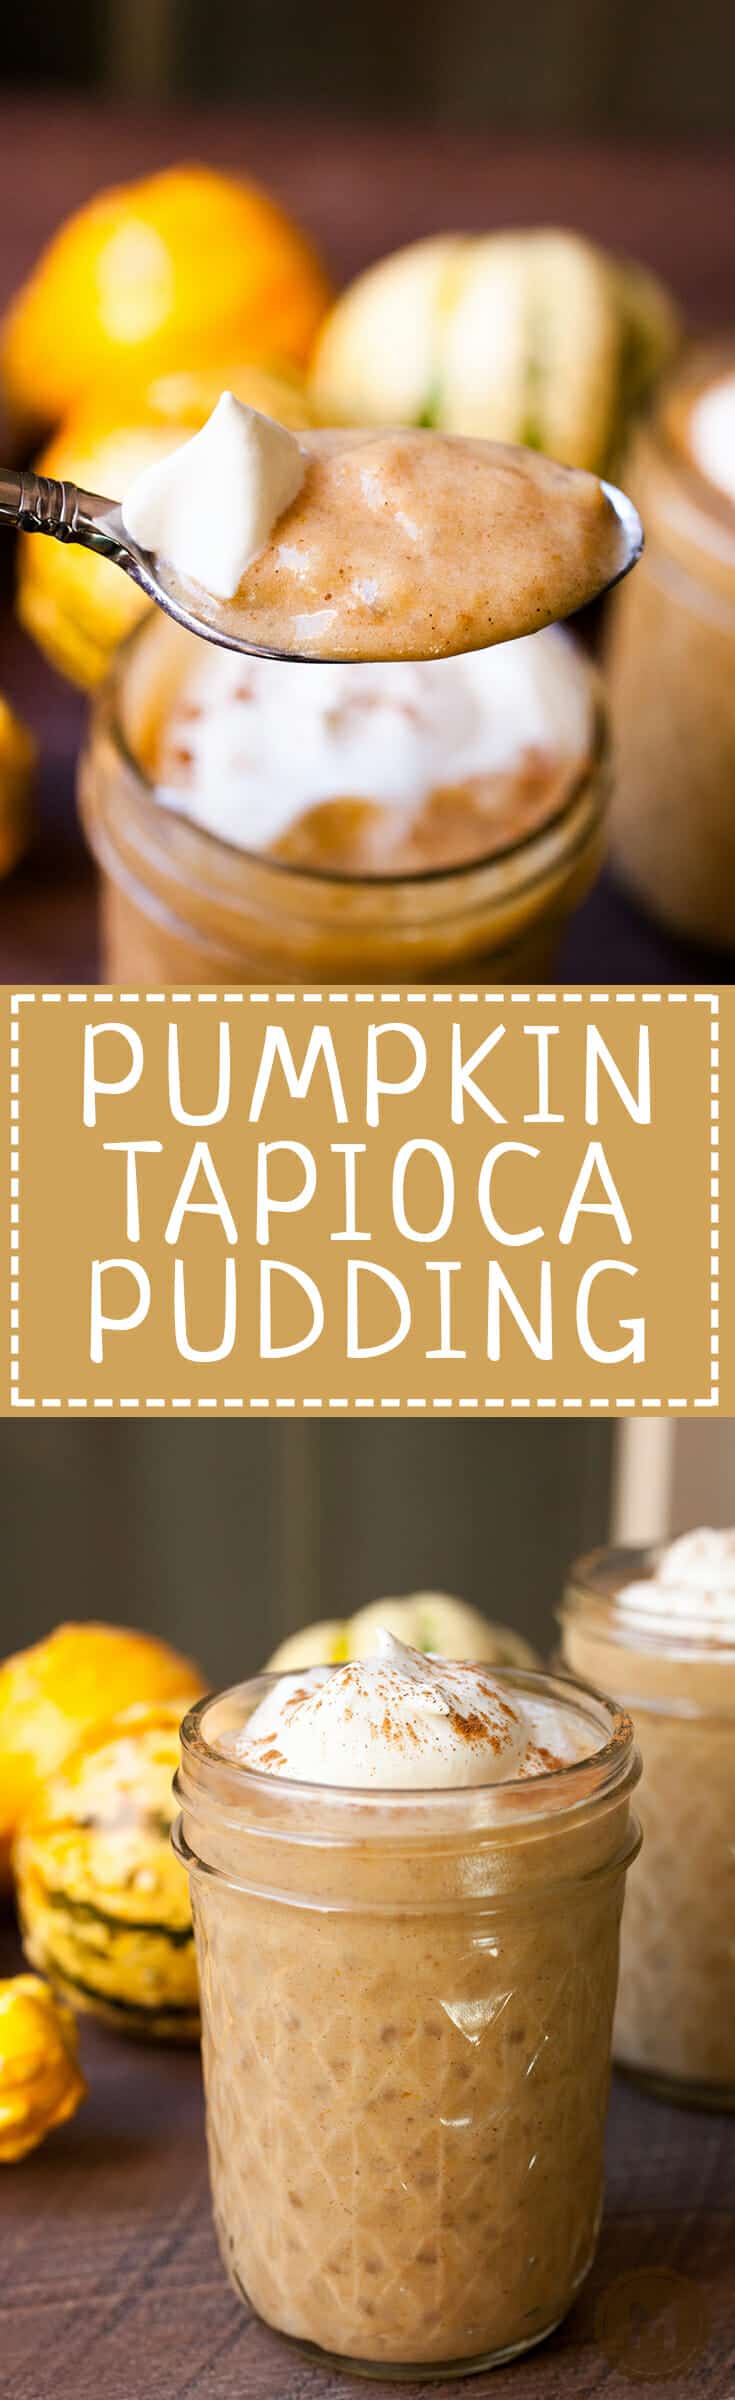 Pumpkin Tapioca Pudding: This creamy homemade tapioca is almost like pumpkin pie in a jar! It's so creamy and delicious and has just enough spice and sweetness. You'll love it. | macheesmo.com